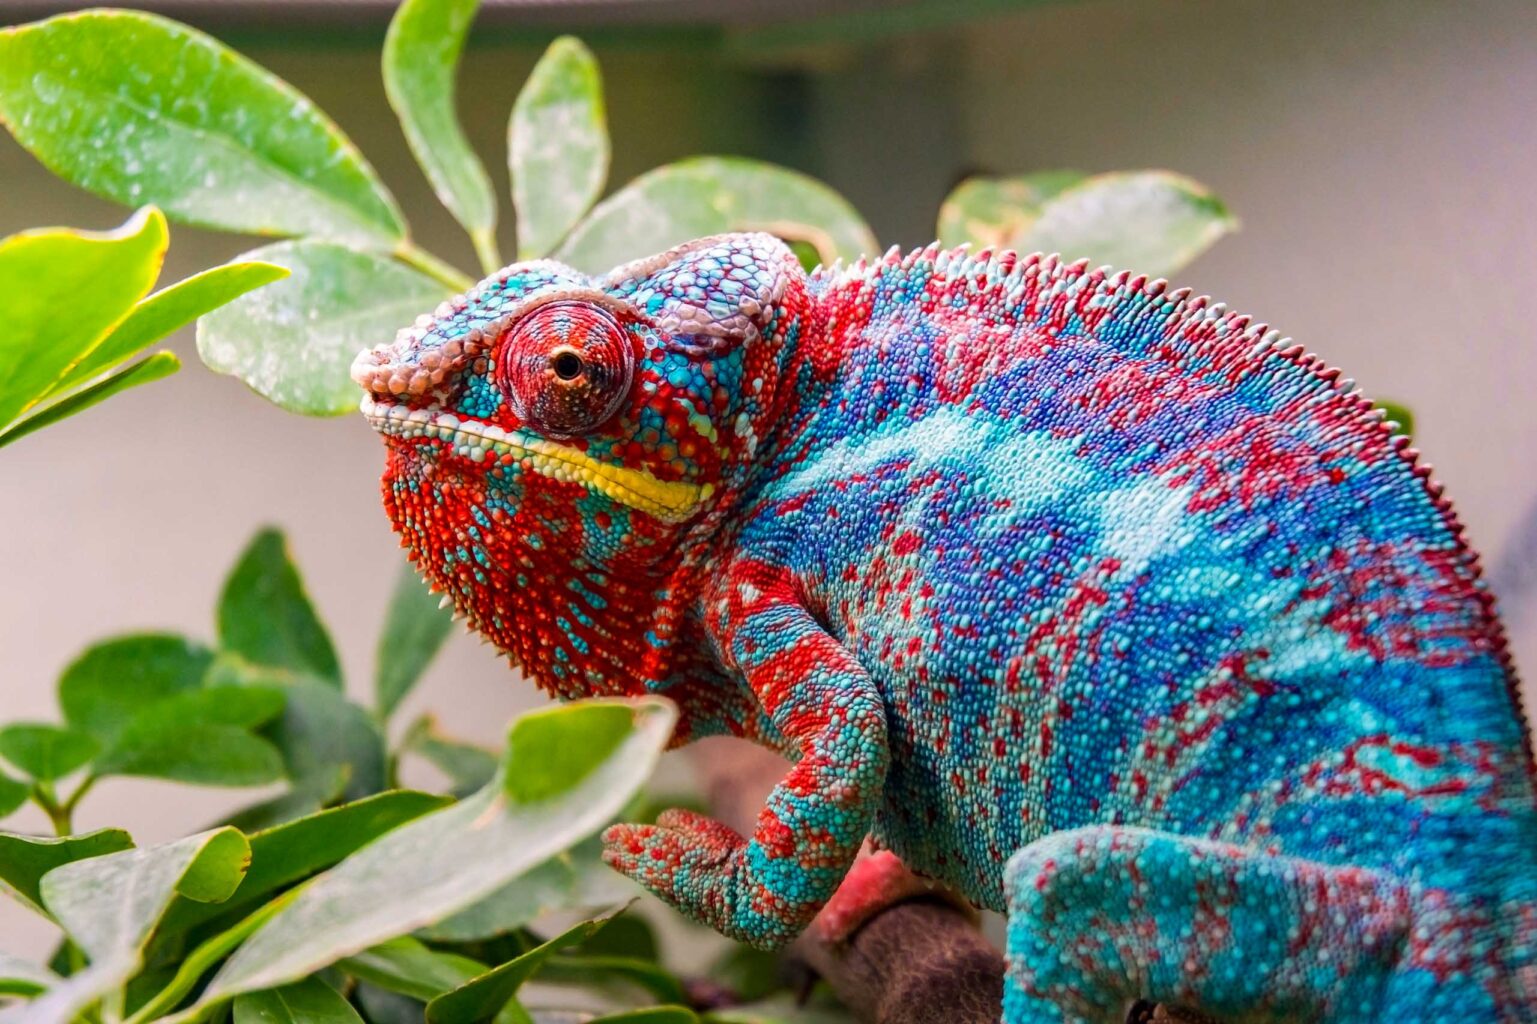 A red and blue chameleon.